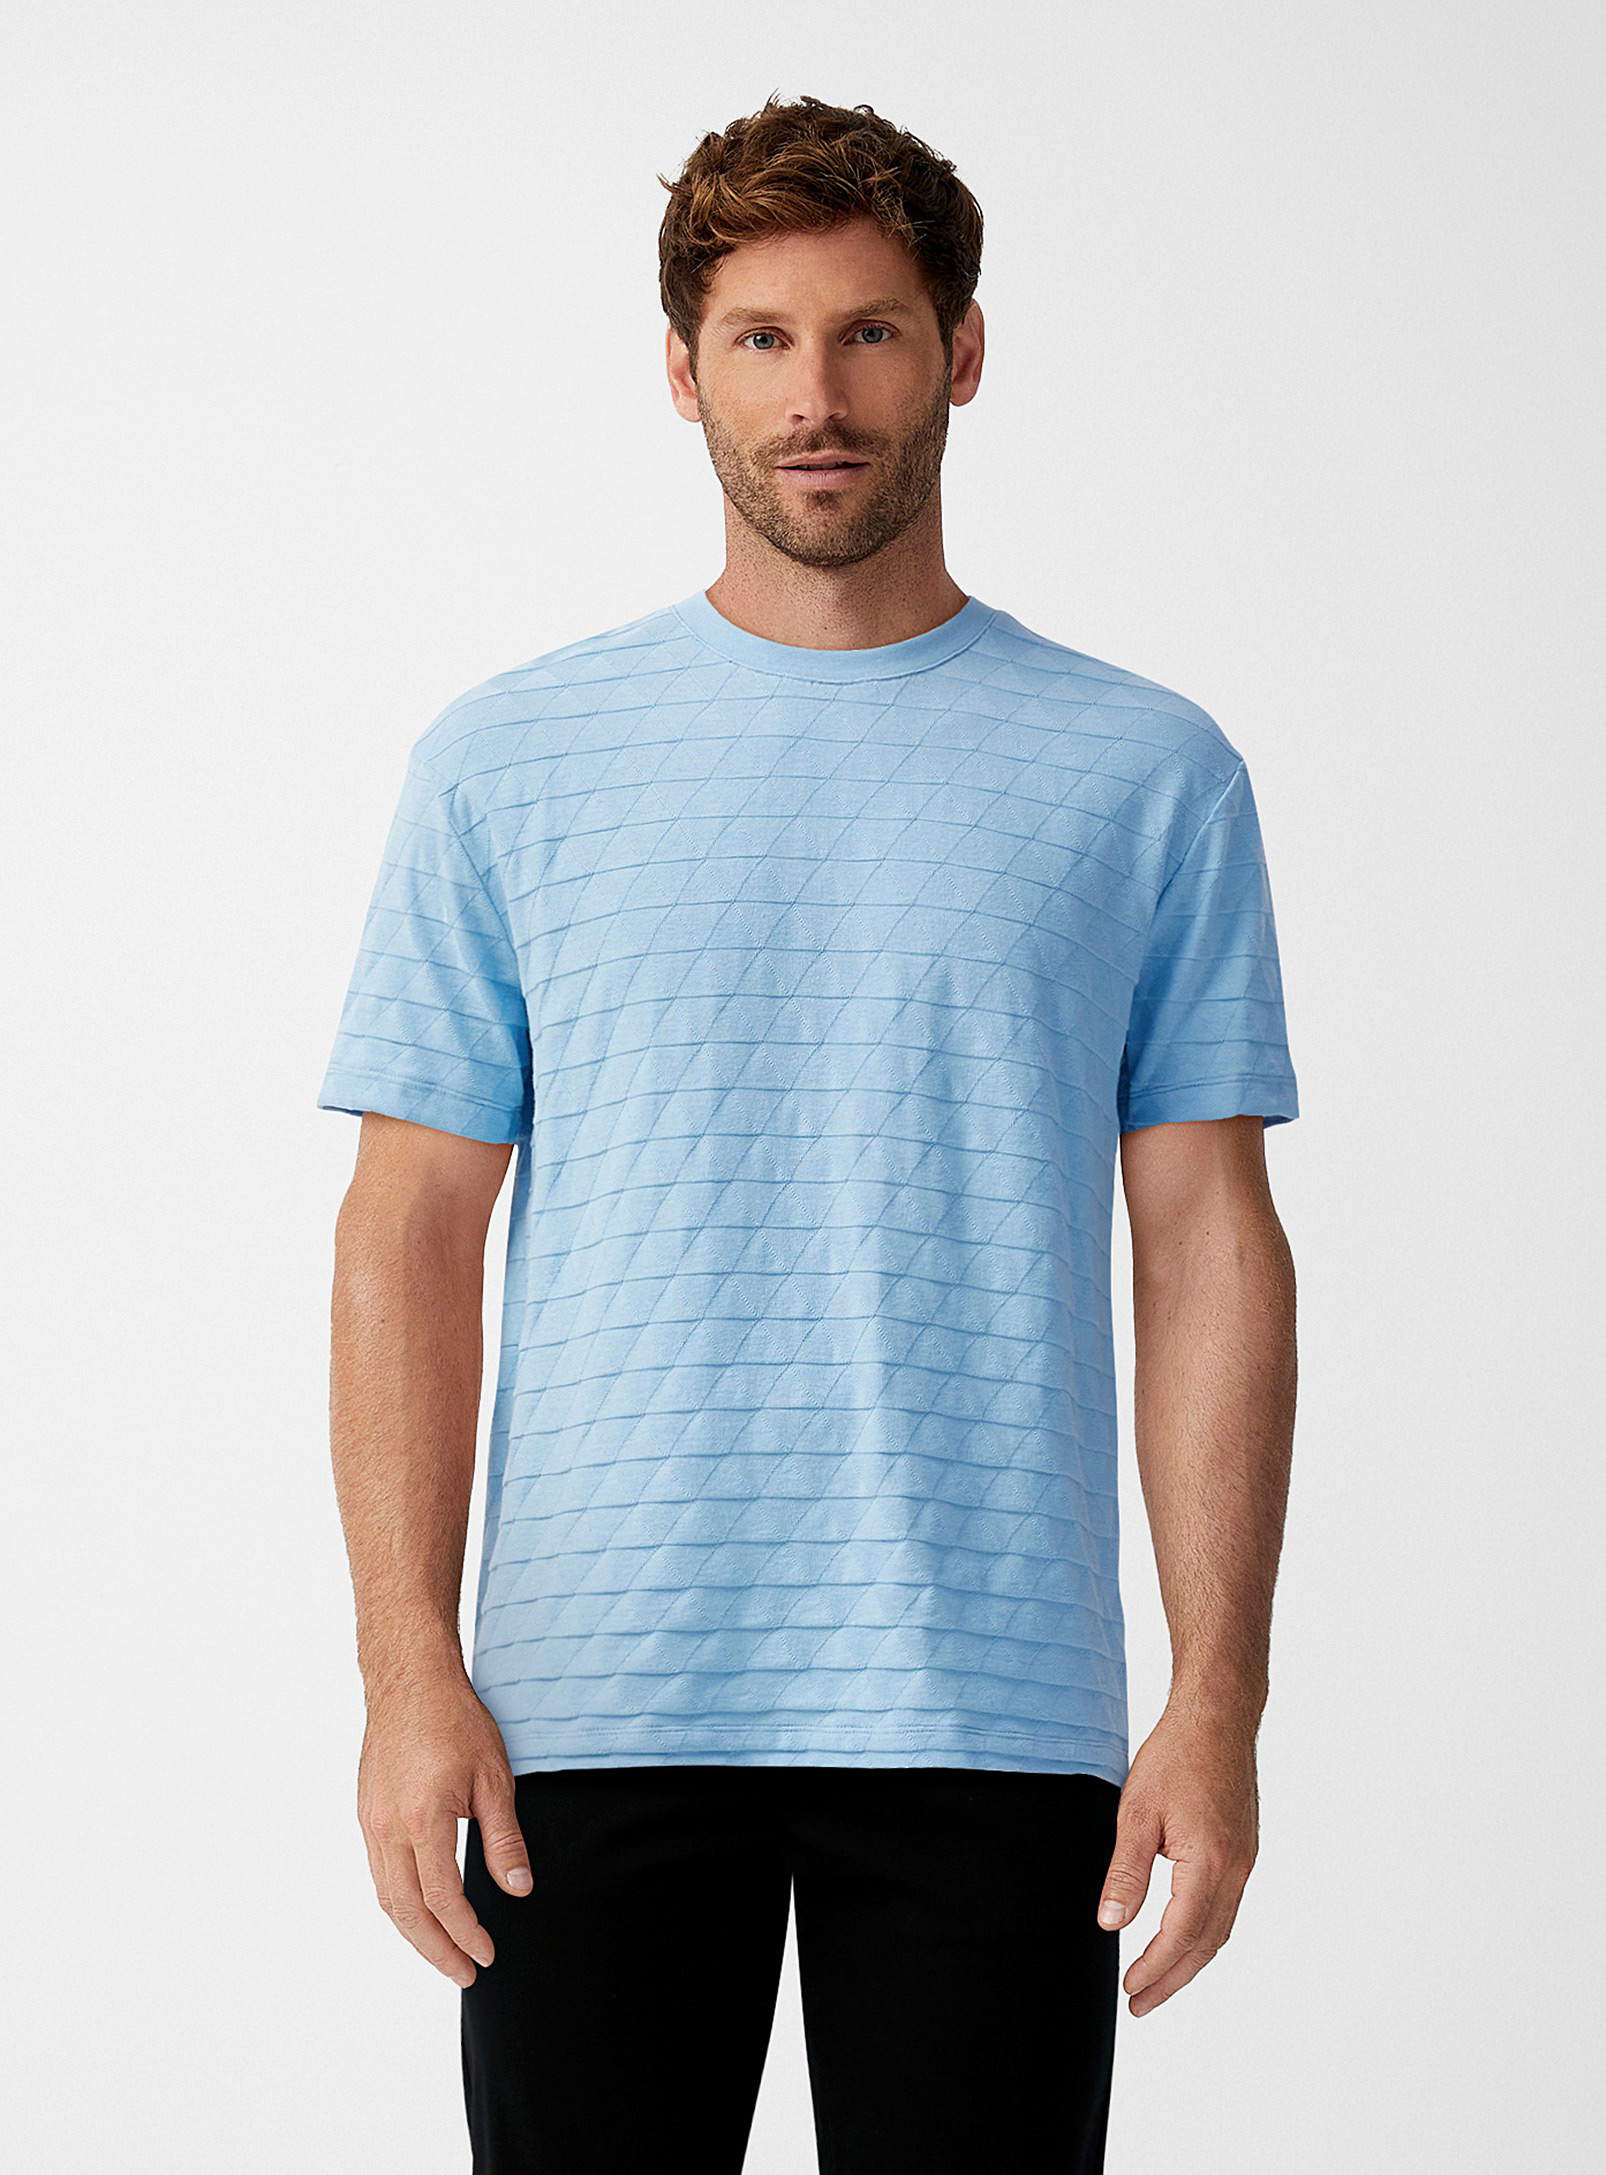 Le 31 Jacquard Pattern T-shirt Comfort Fit In Baby Blue